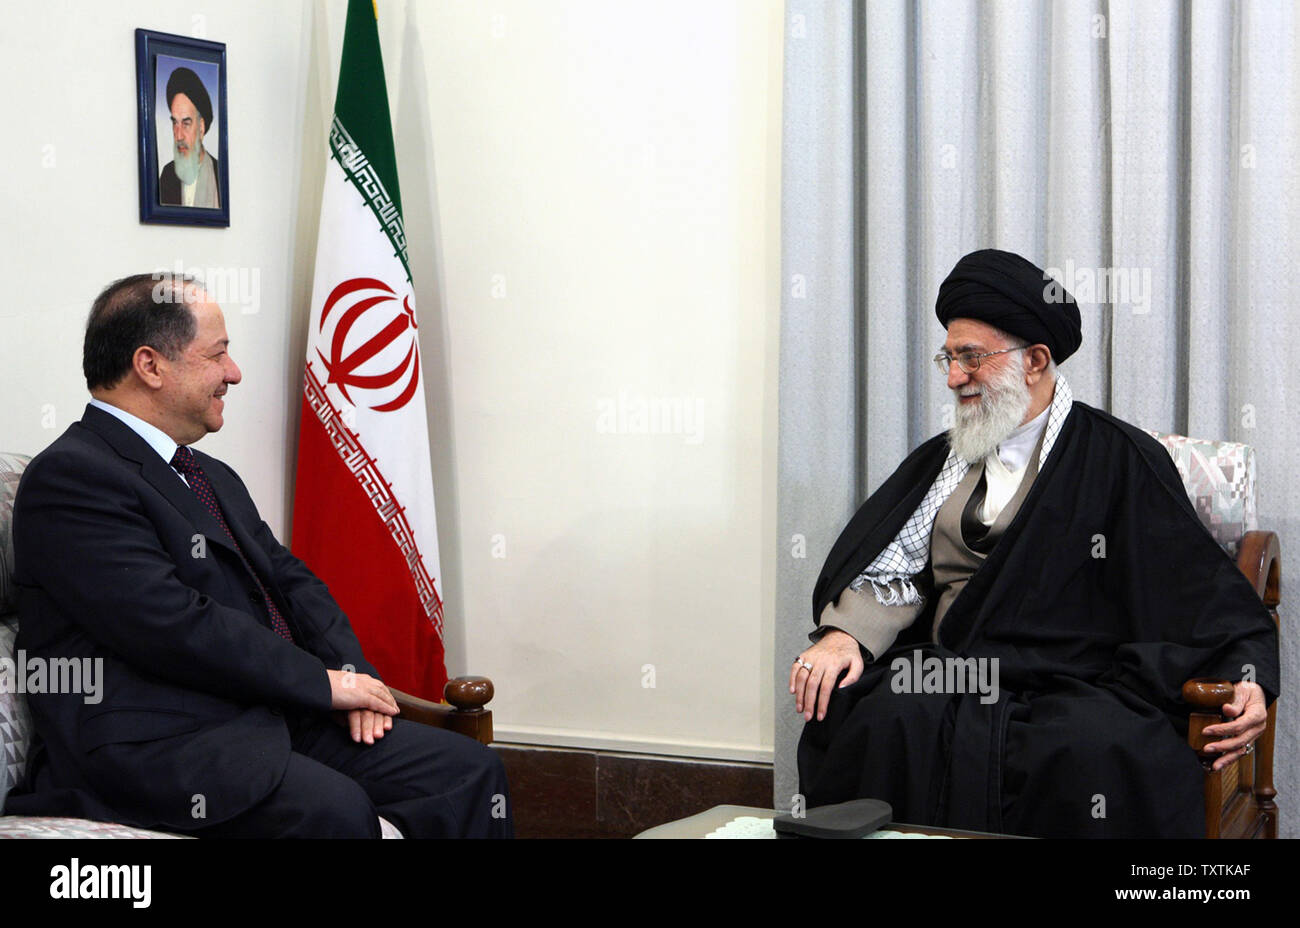 Iran's supreme Leader Ayatollah Khamenei (R) meets with  Masoud Barzani the head of the autonomous Kurdish region in Iraq, during their official meeting in presidential palace in Tehran, Iran on Oct 30,2011.     UPI/Khamenei Hand Out Image Stock Photo